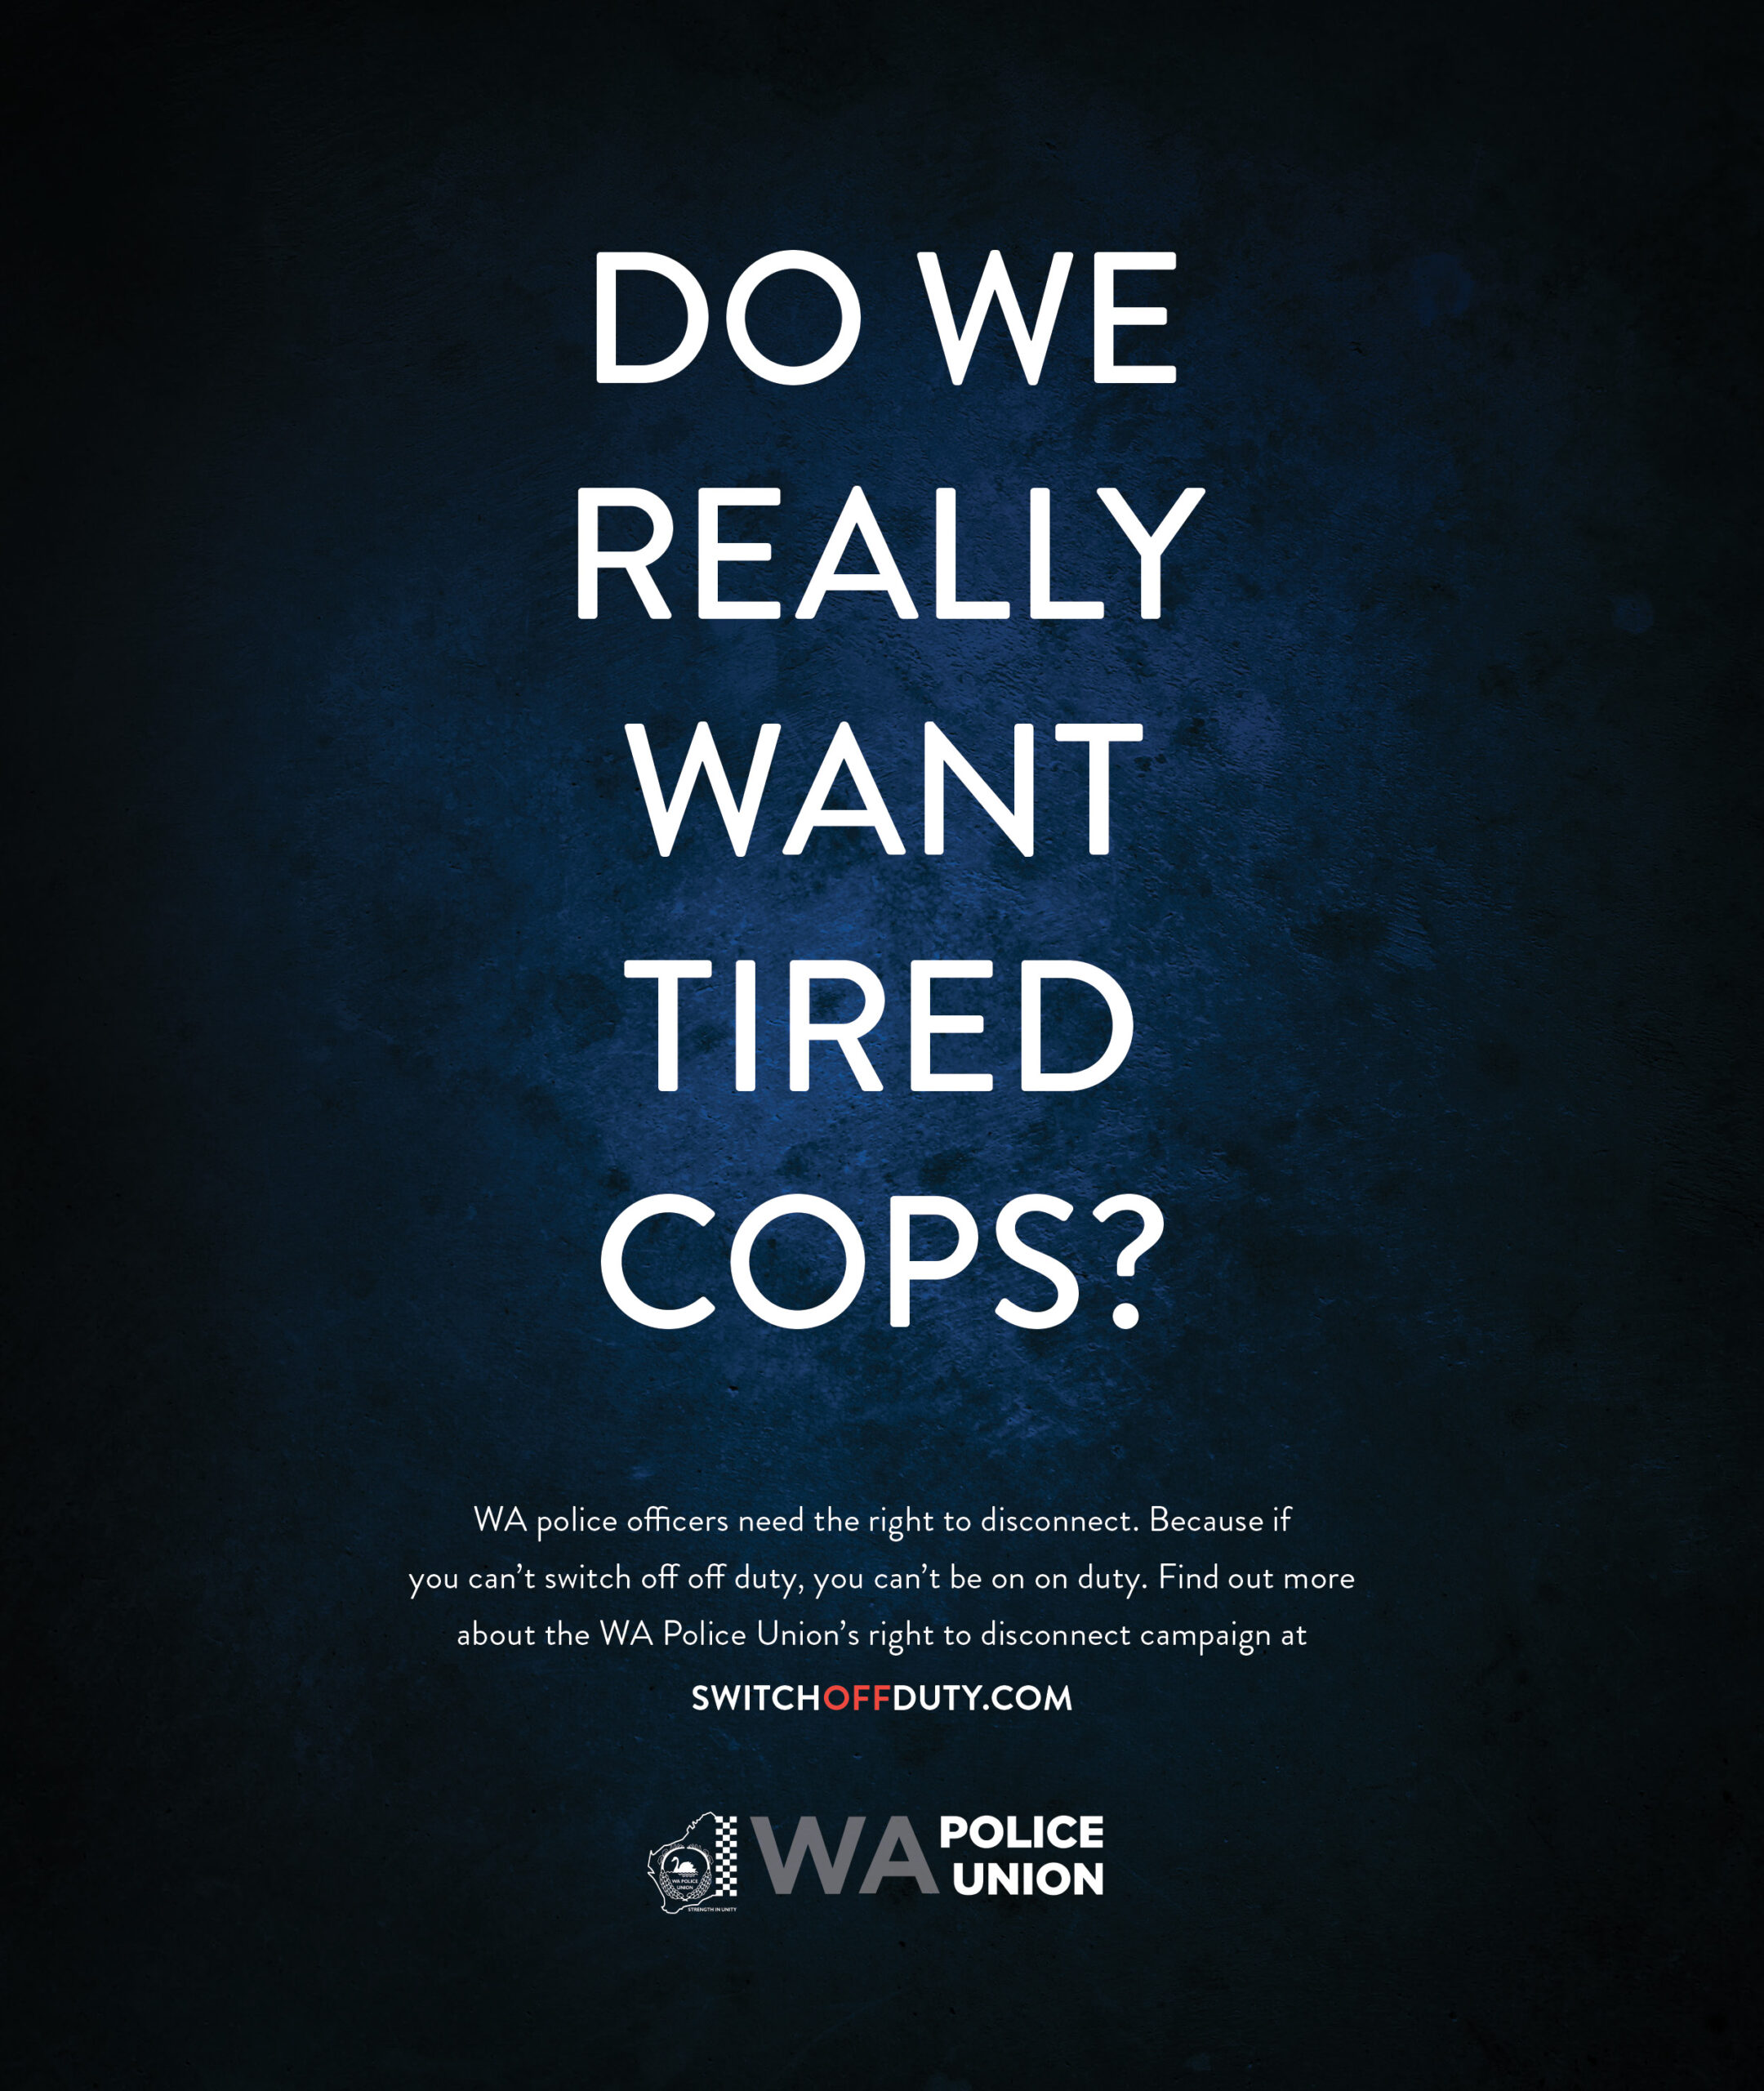 Do we really want tired cops?